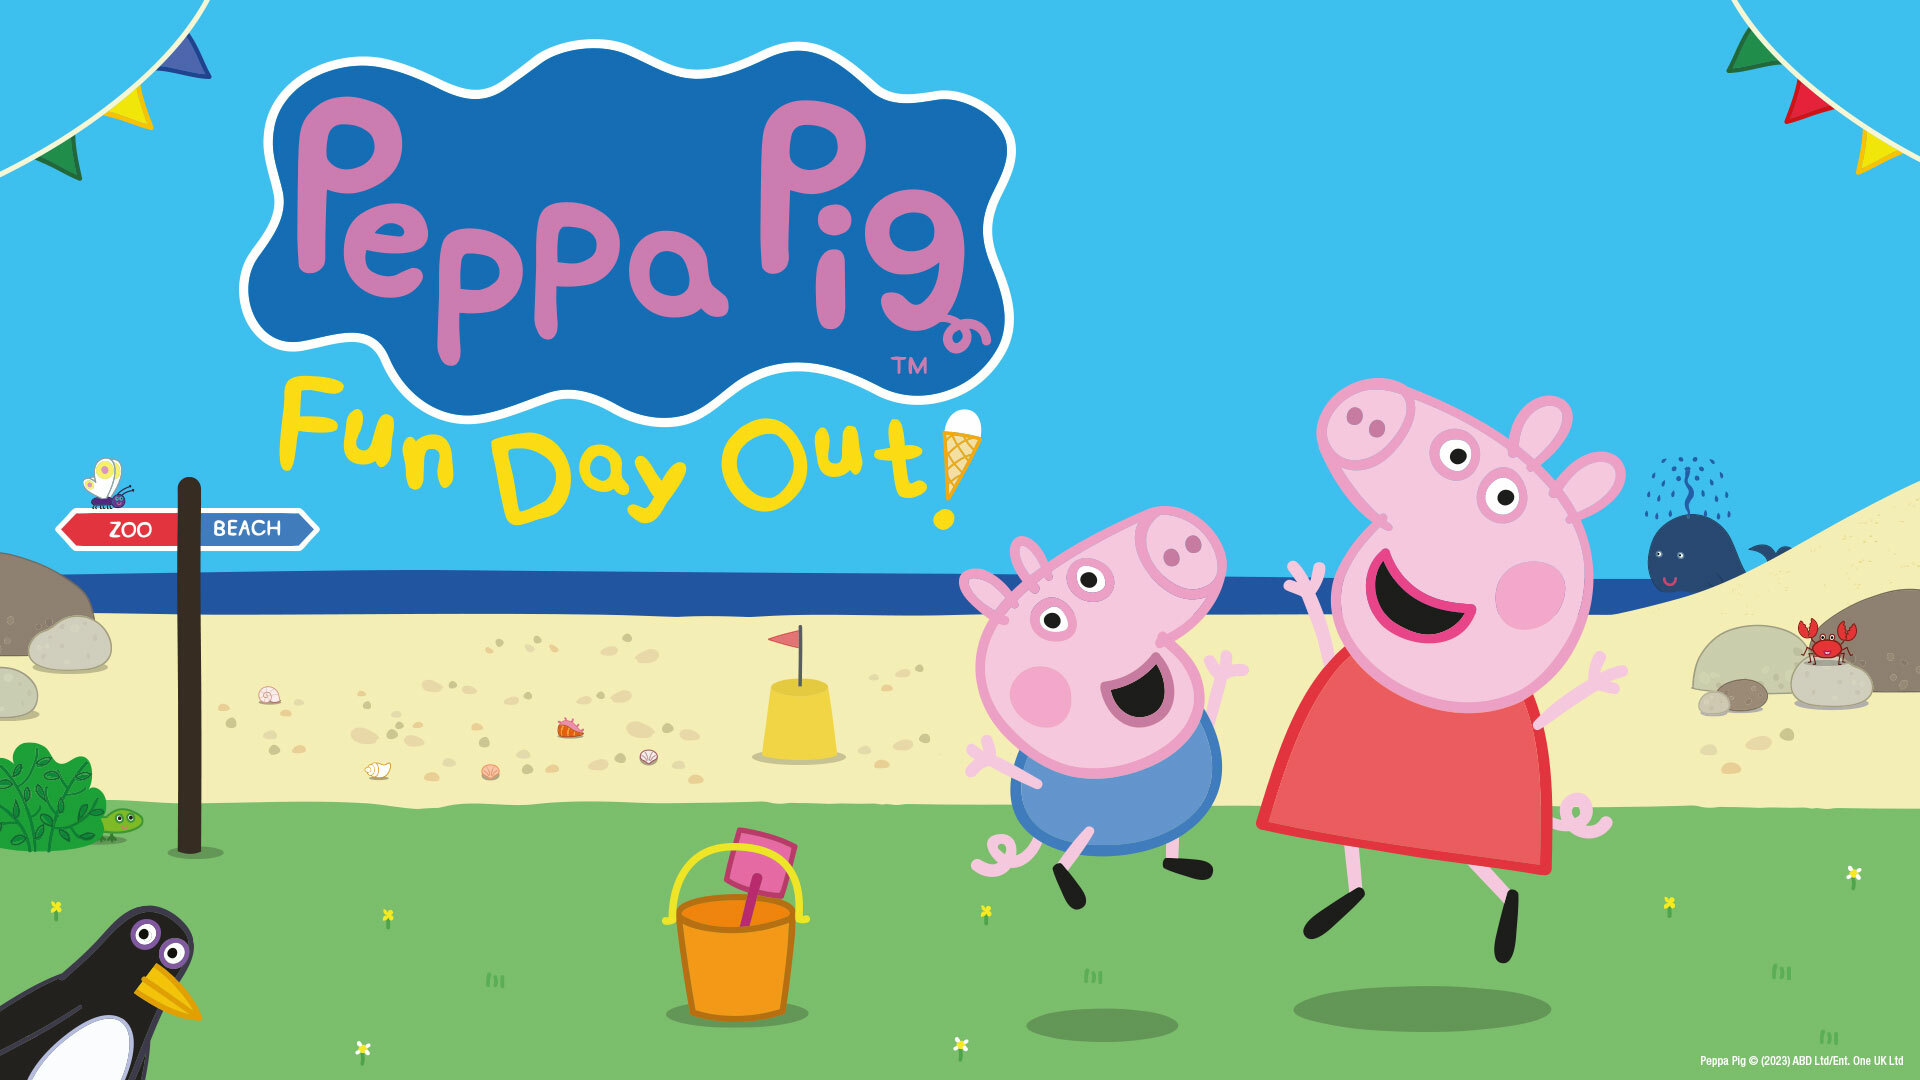 Peppa Pig Full Episodes, NEW Compilation 30